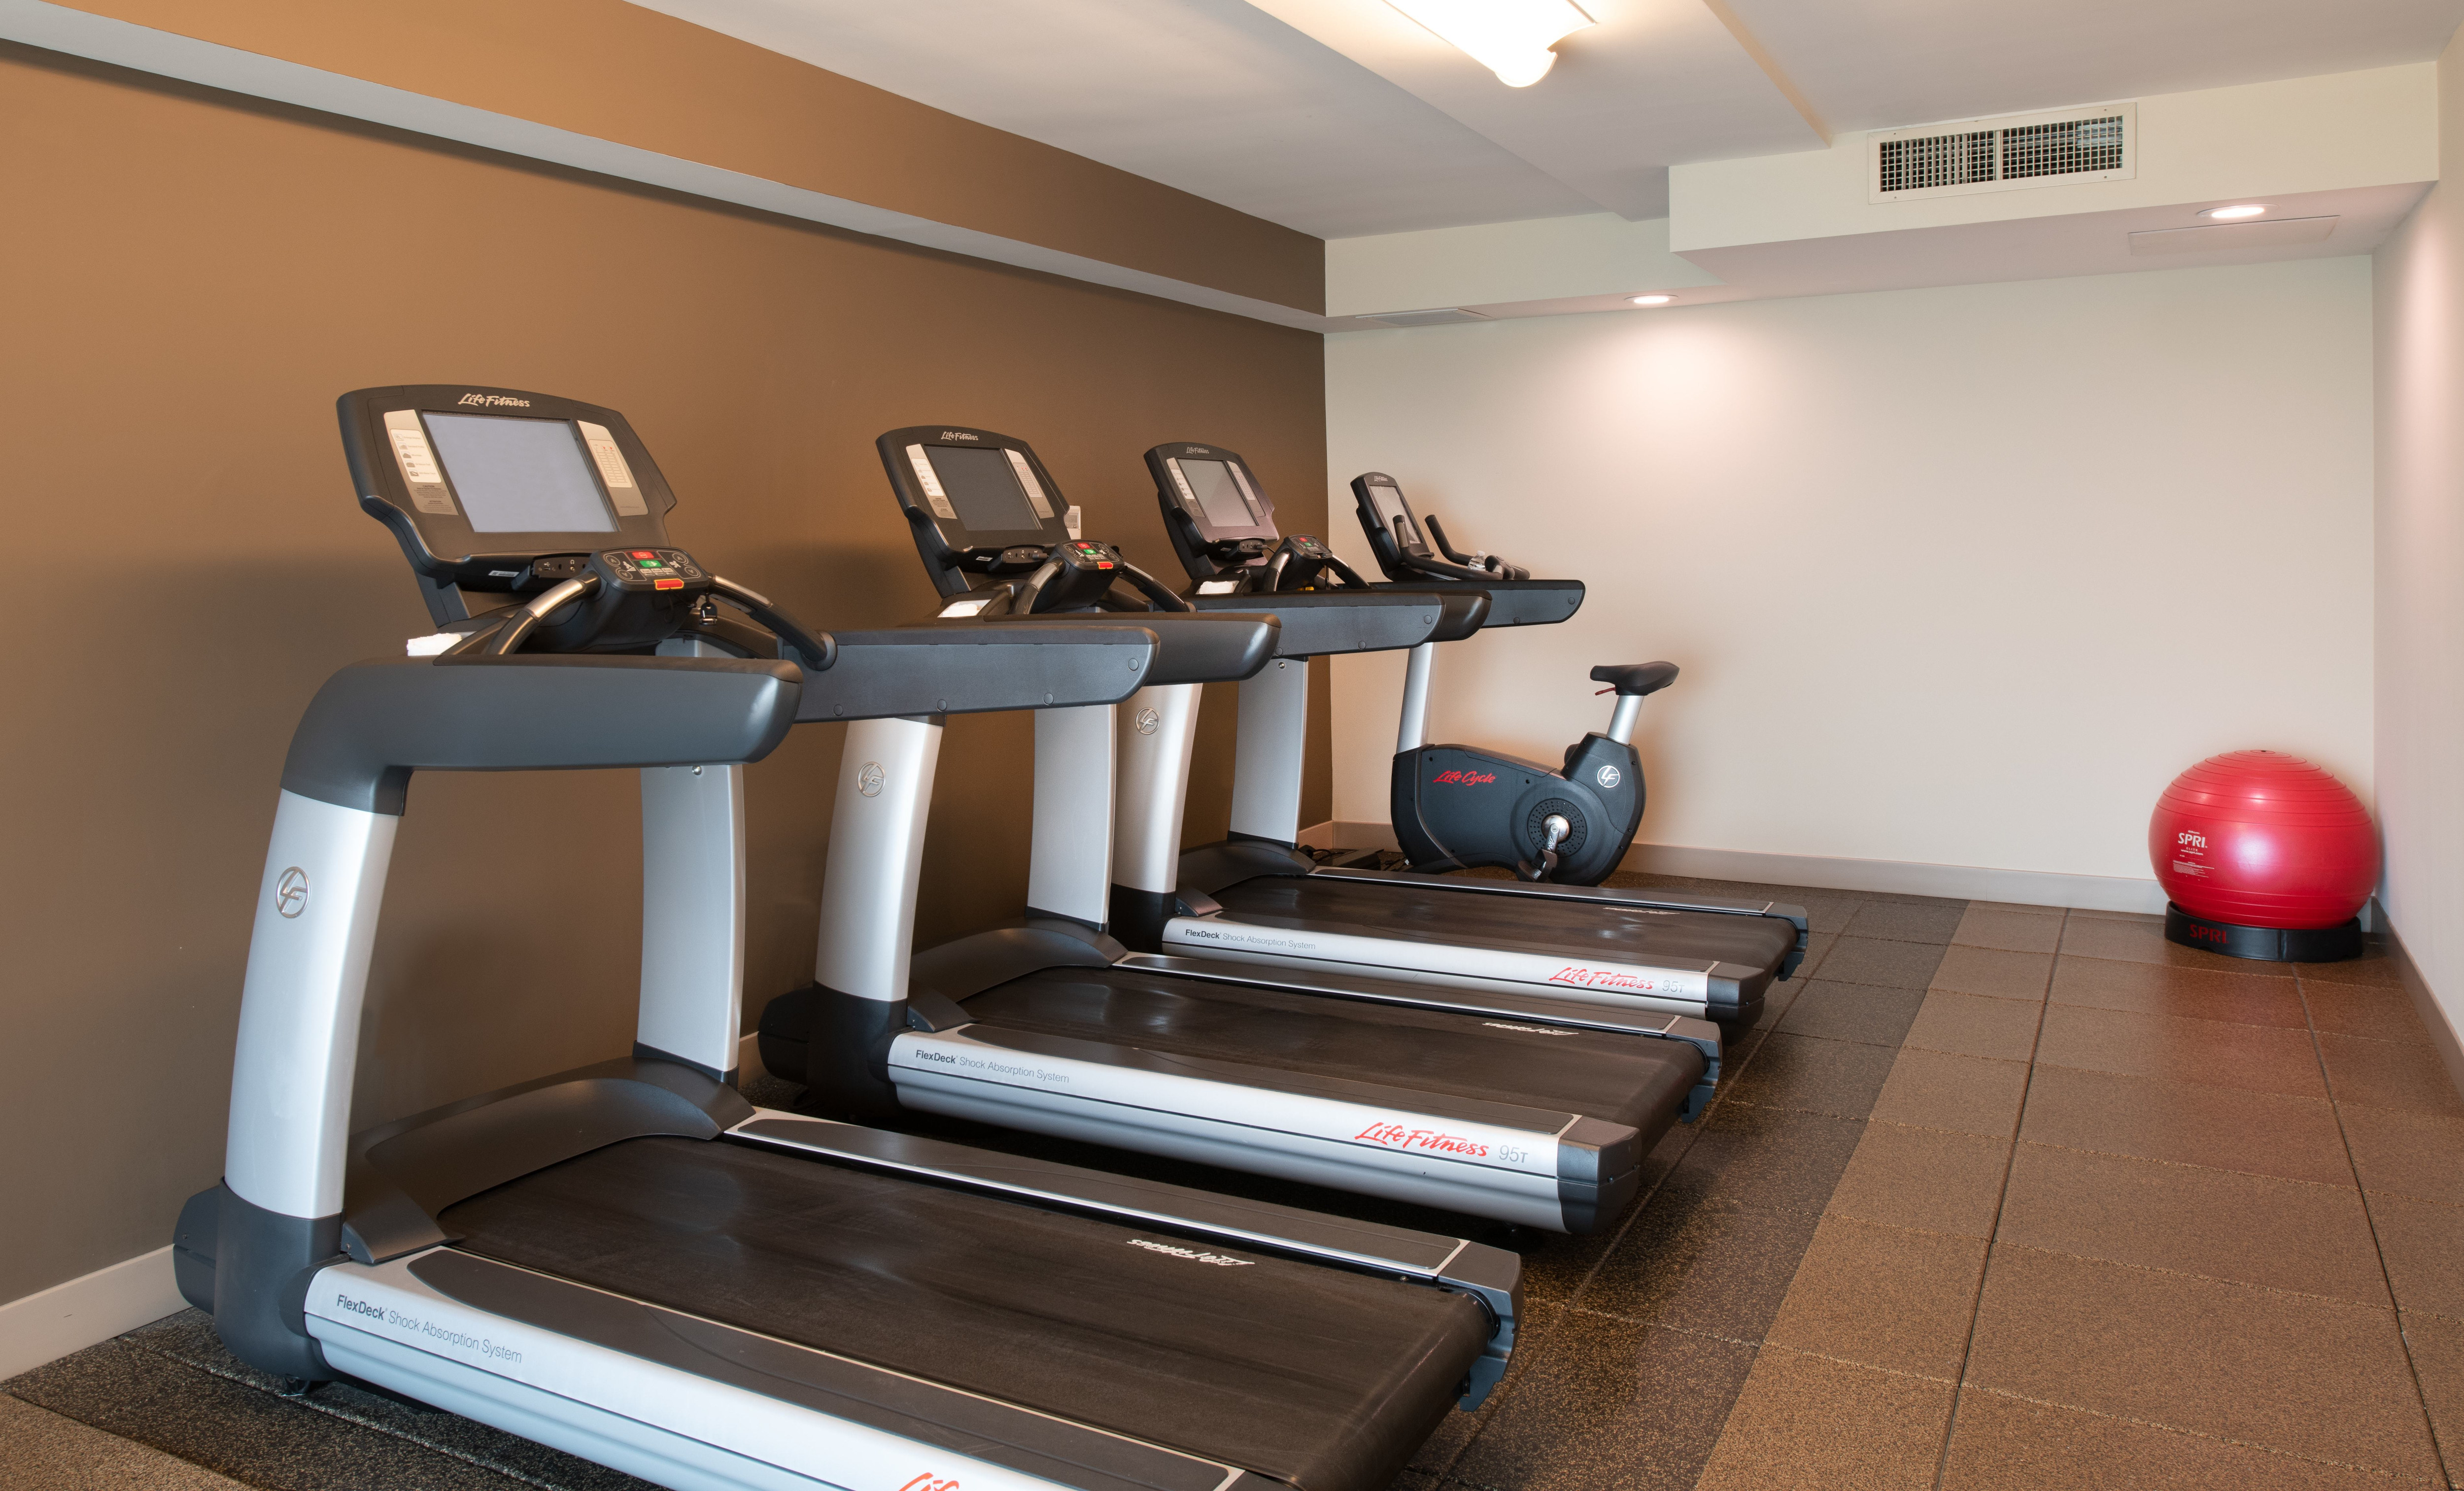 Hotel Fitness Center and Equipment